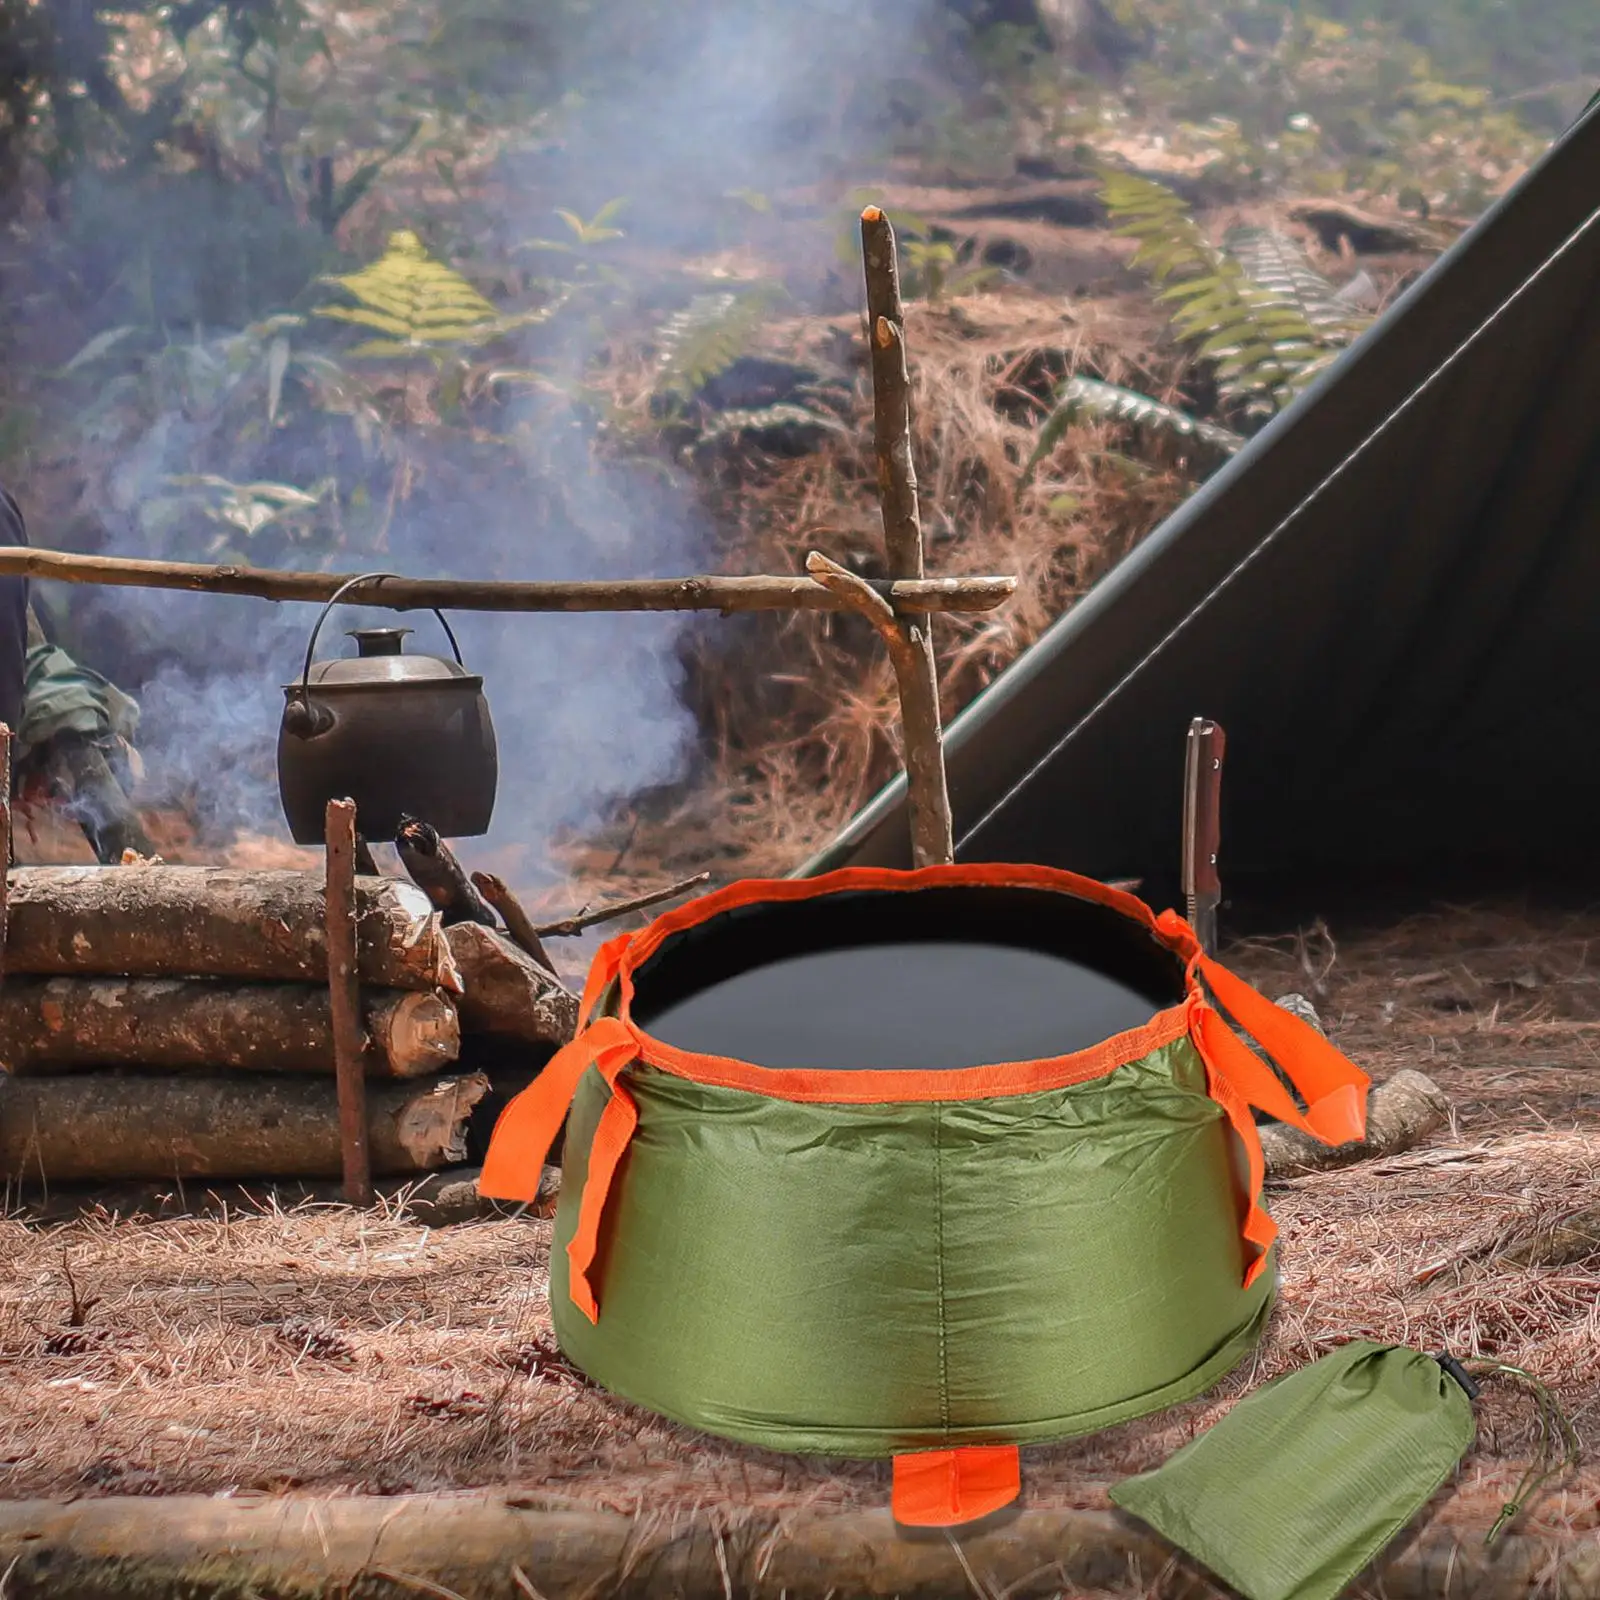 Portable Collapsible Bucket Foldable with Carry Bag Wash Basin Lightweight for Camping Car Washing Survival Hiking Outdoor